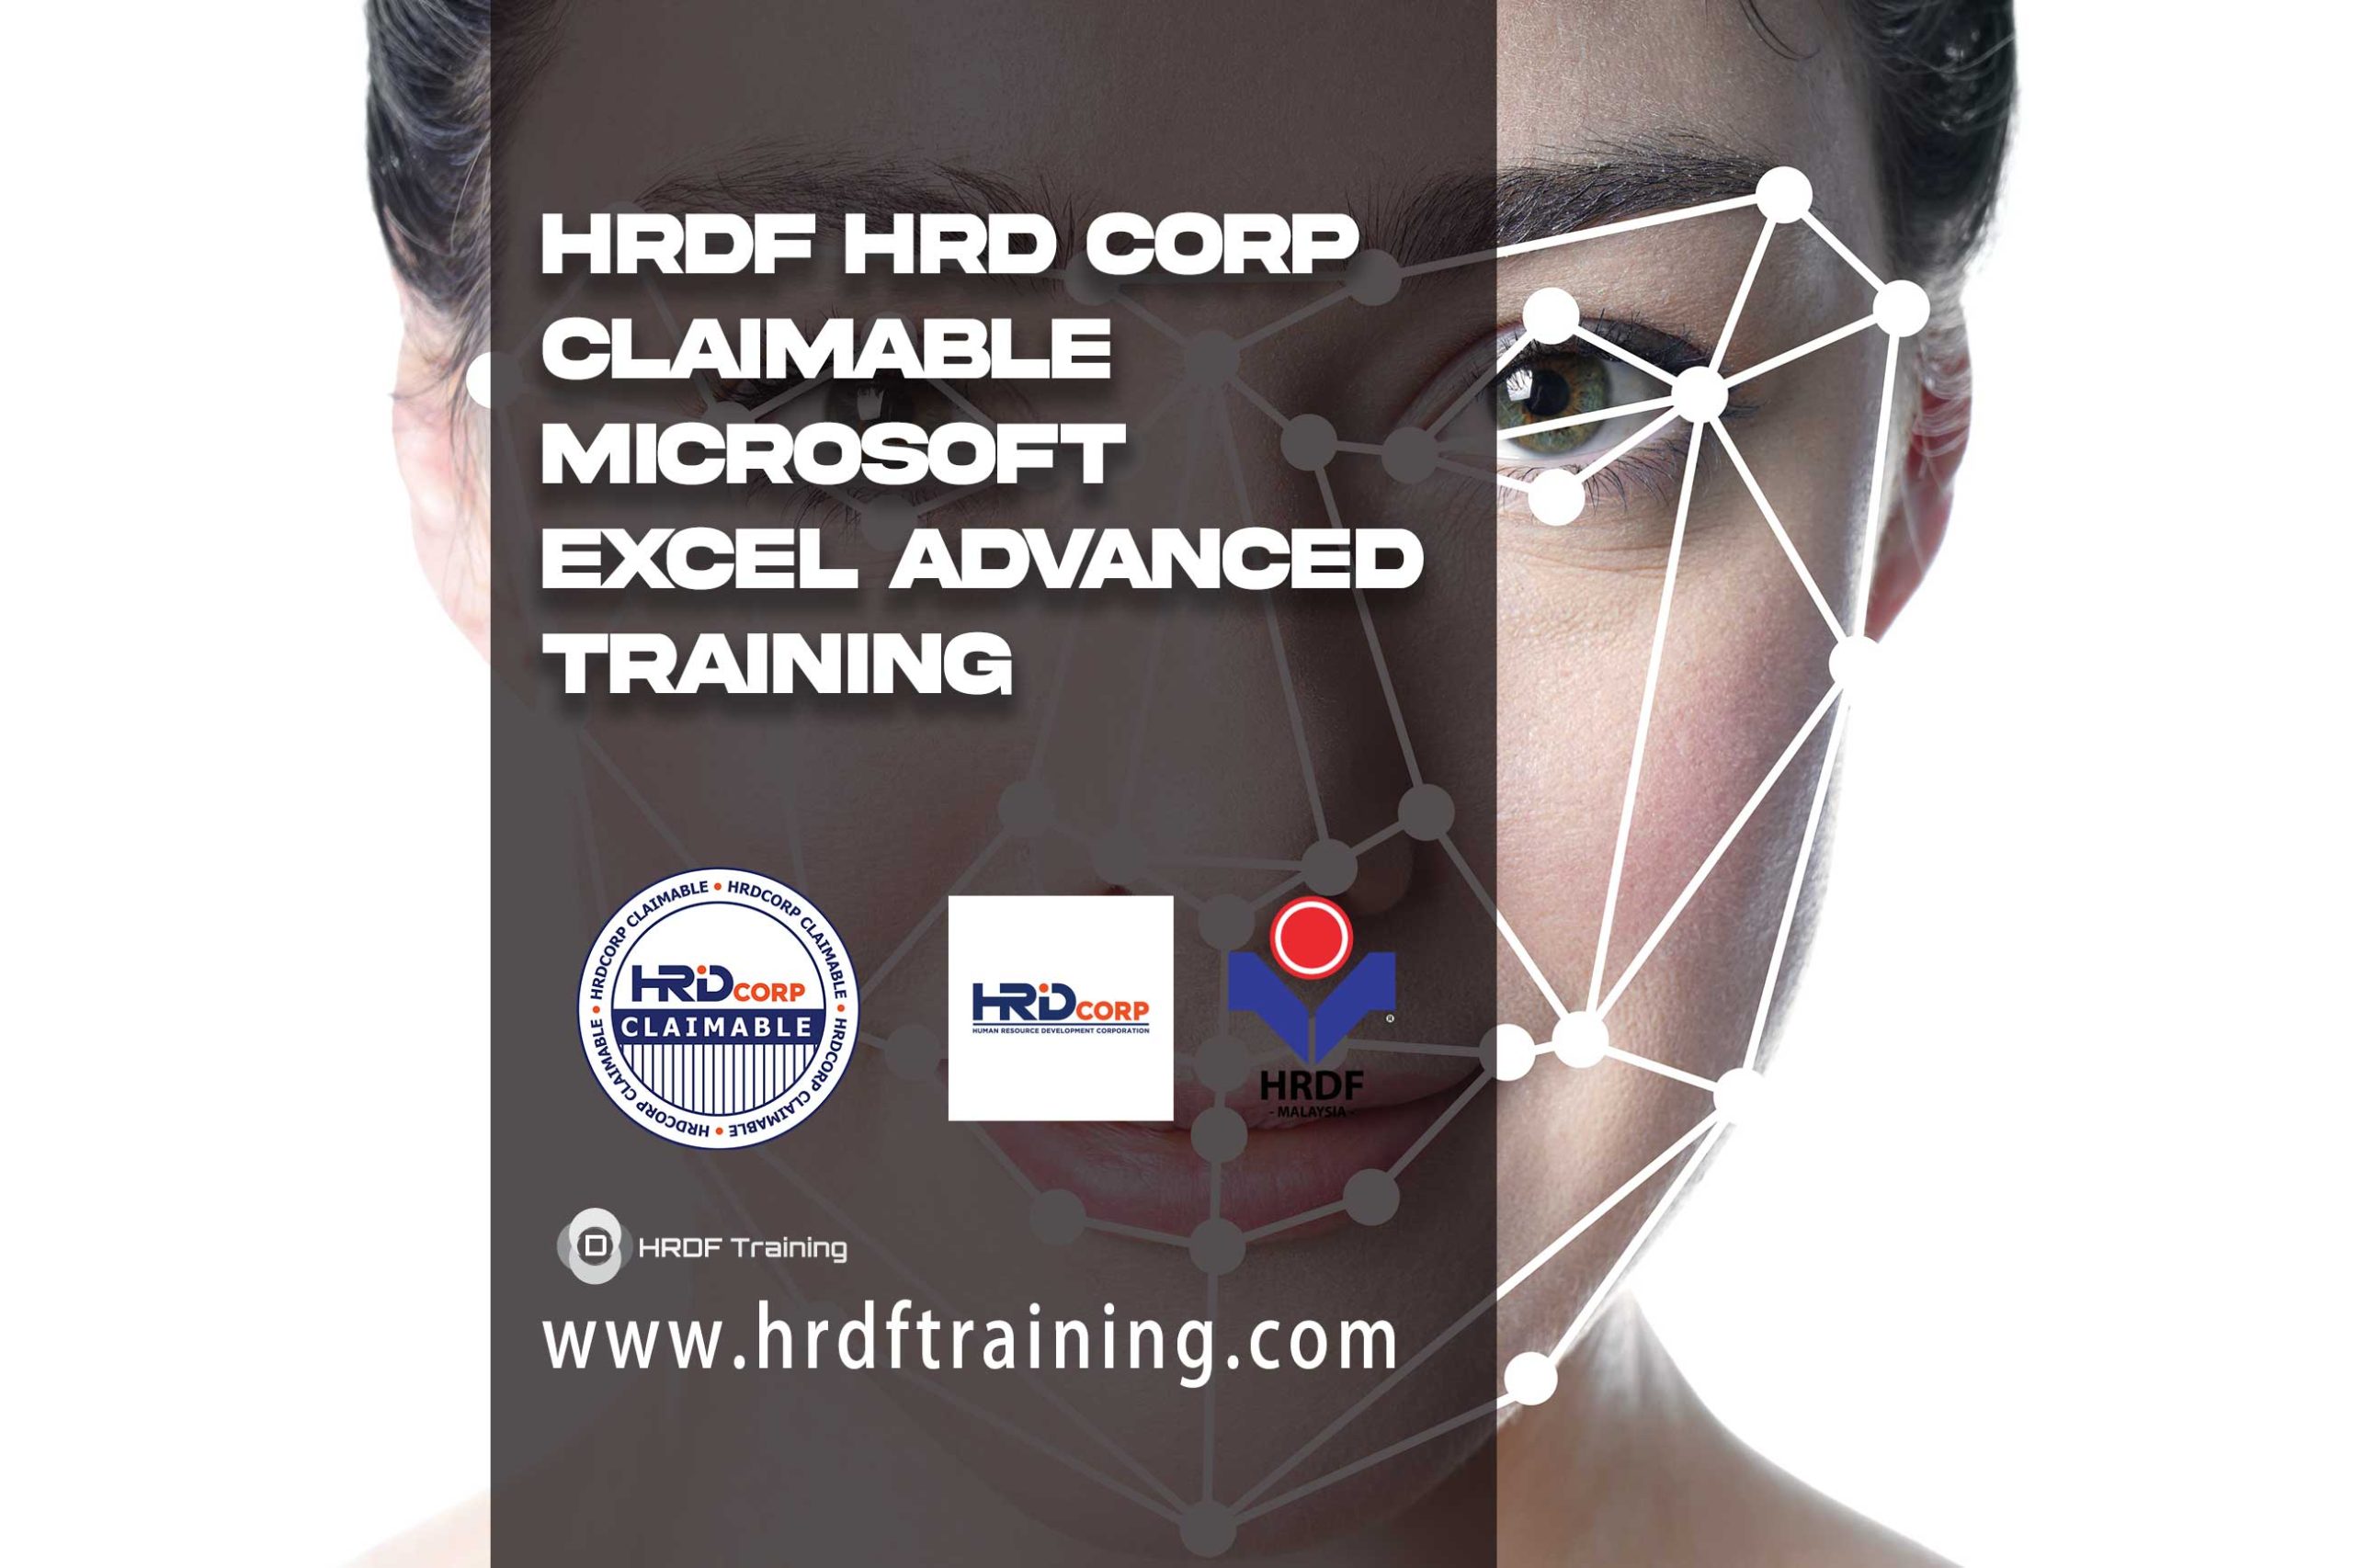 HRDF-HRD-Corp-Claimable-Microsoft-Excel-Advanced-Training